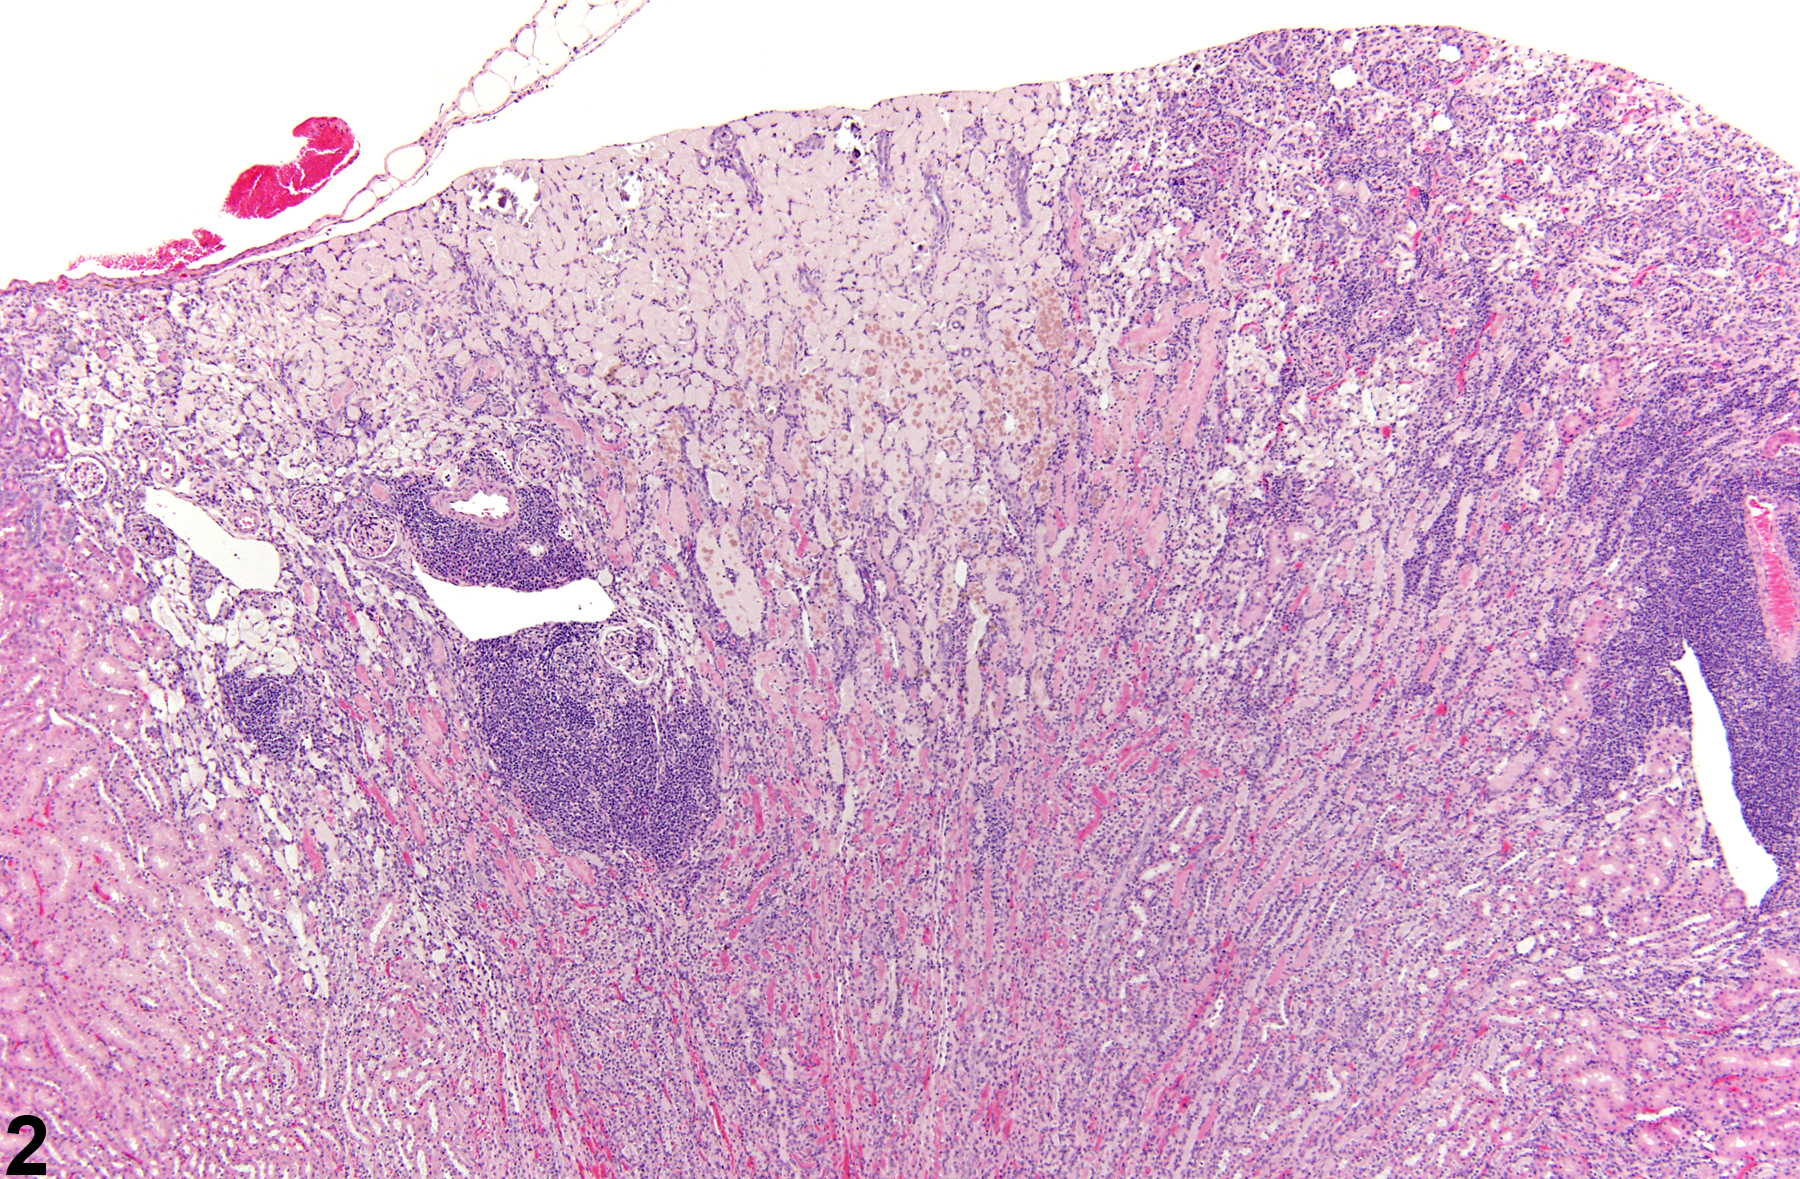 Image of infarct in the kidney from a female B6C3F1 mouse in a chronic study